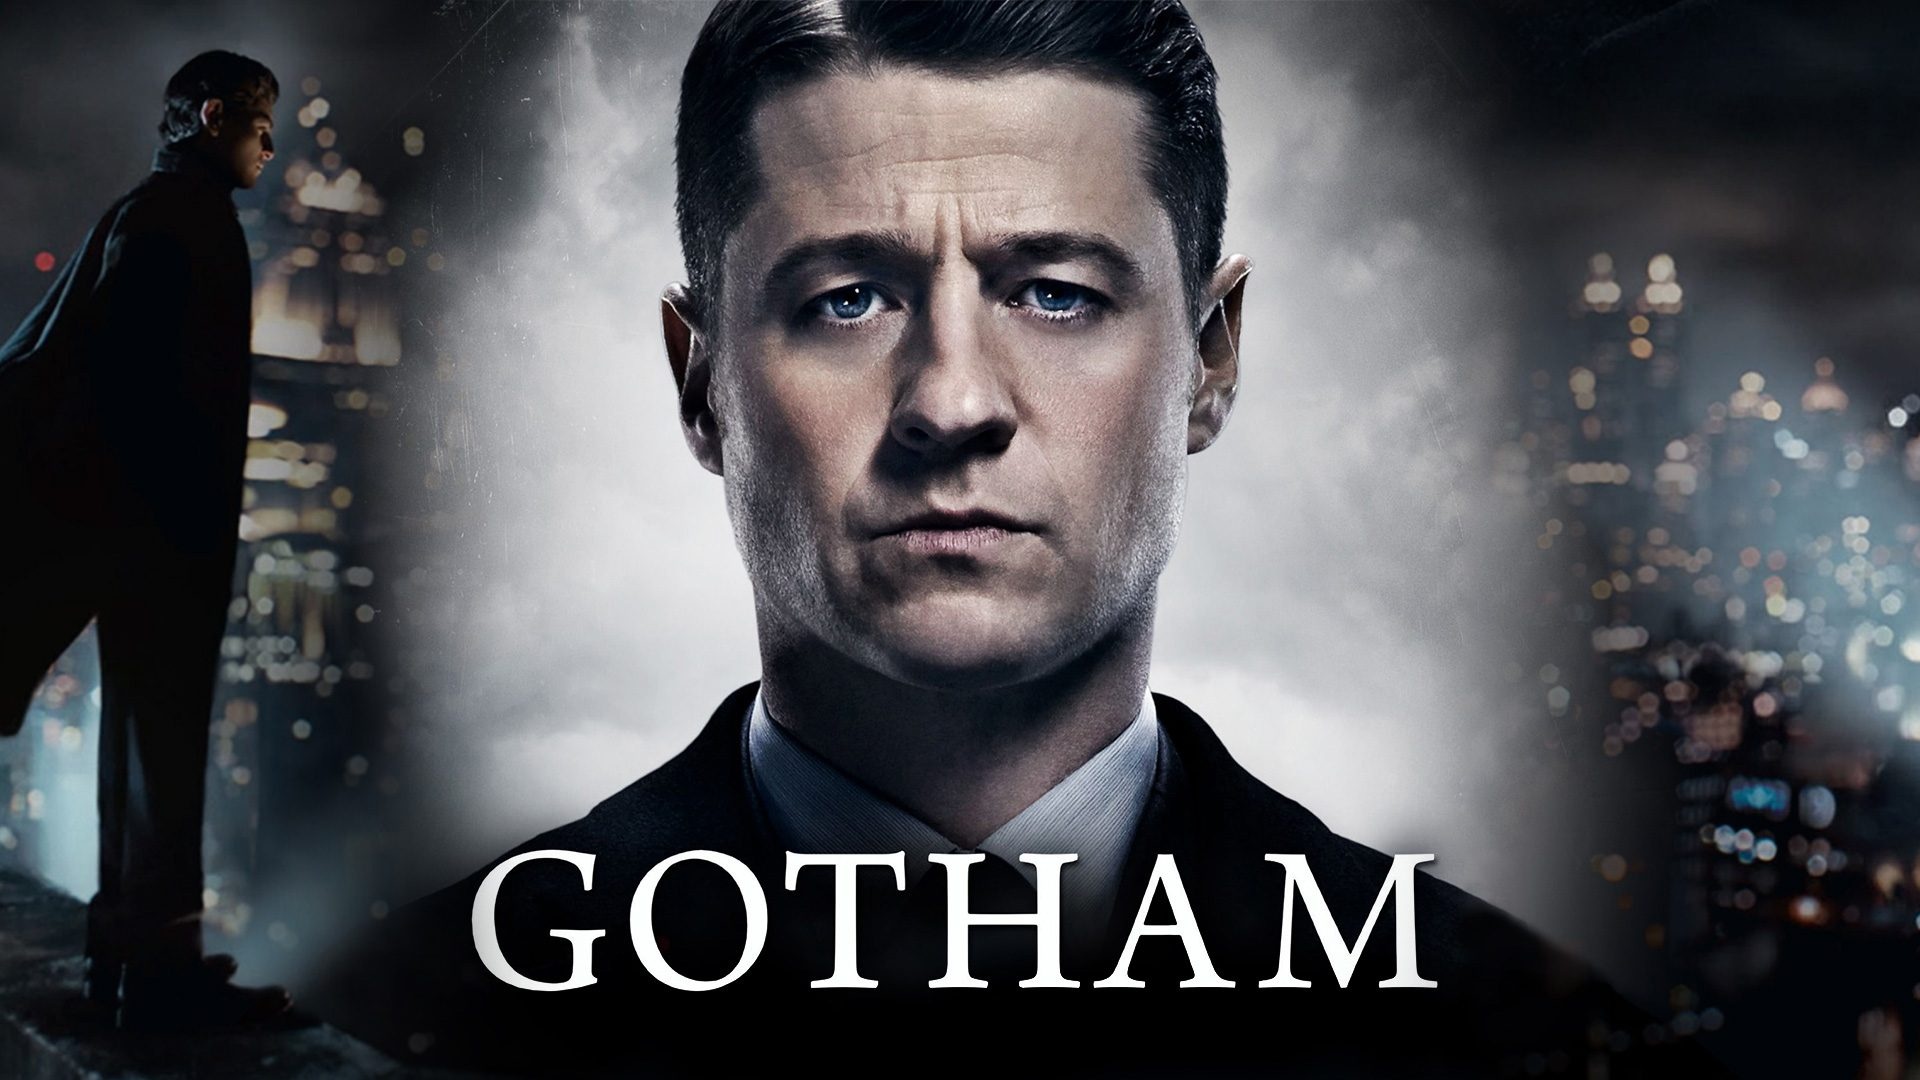 Gotham TV series, Intriguing crime drama, Twists and turns, Compelling storytelling, 1920x1080 Full HD Desktop